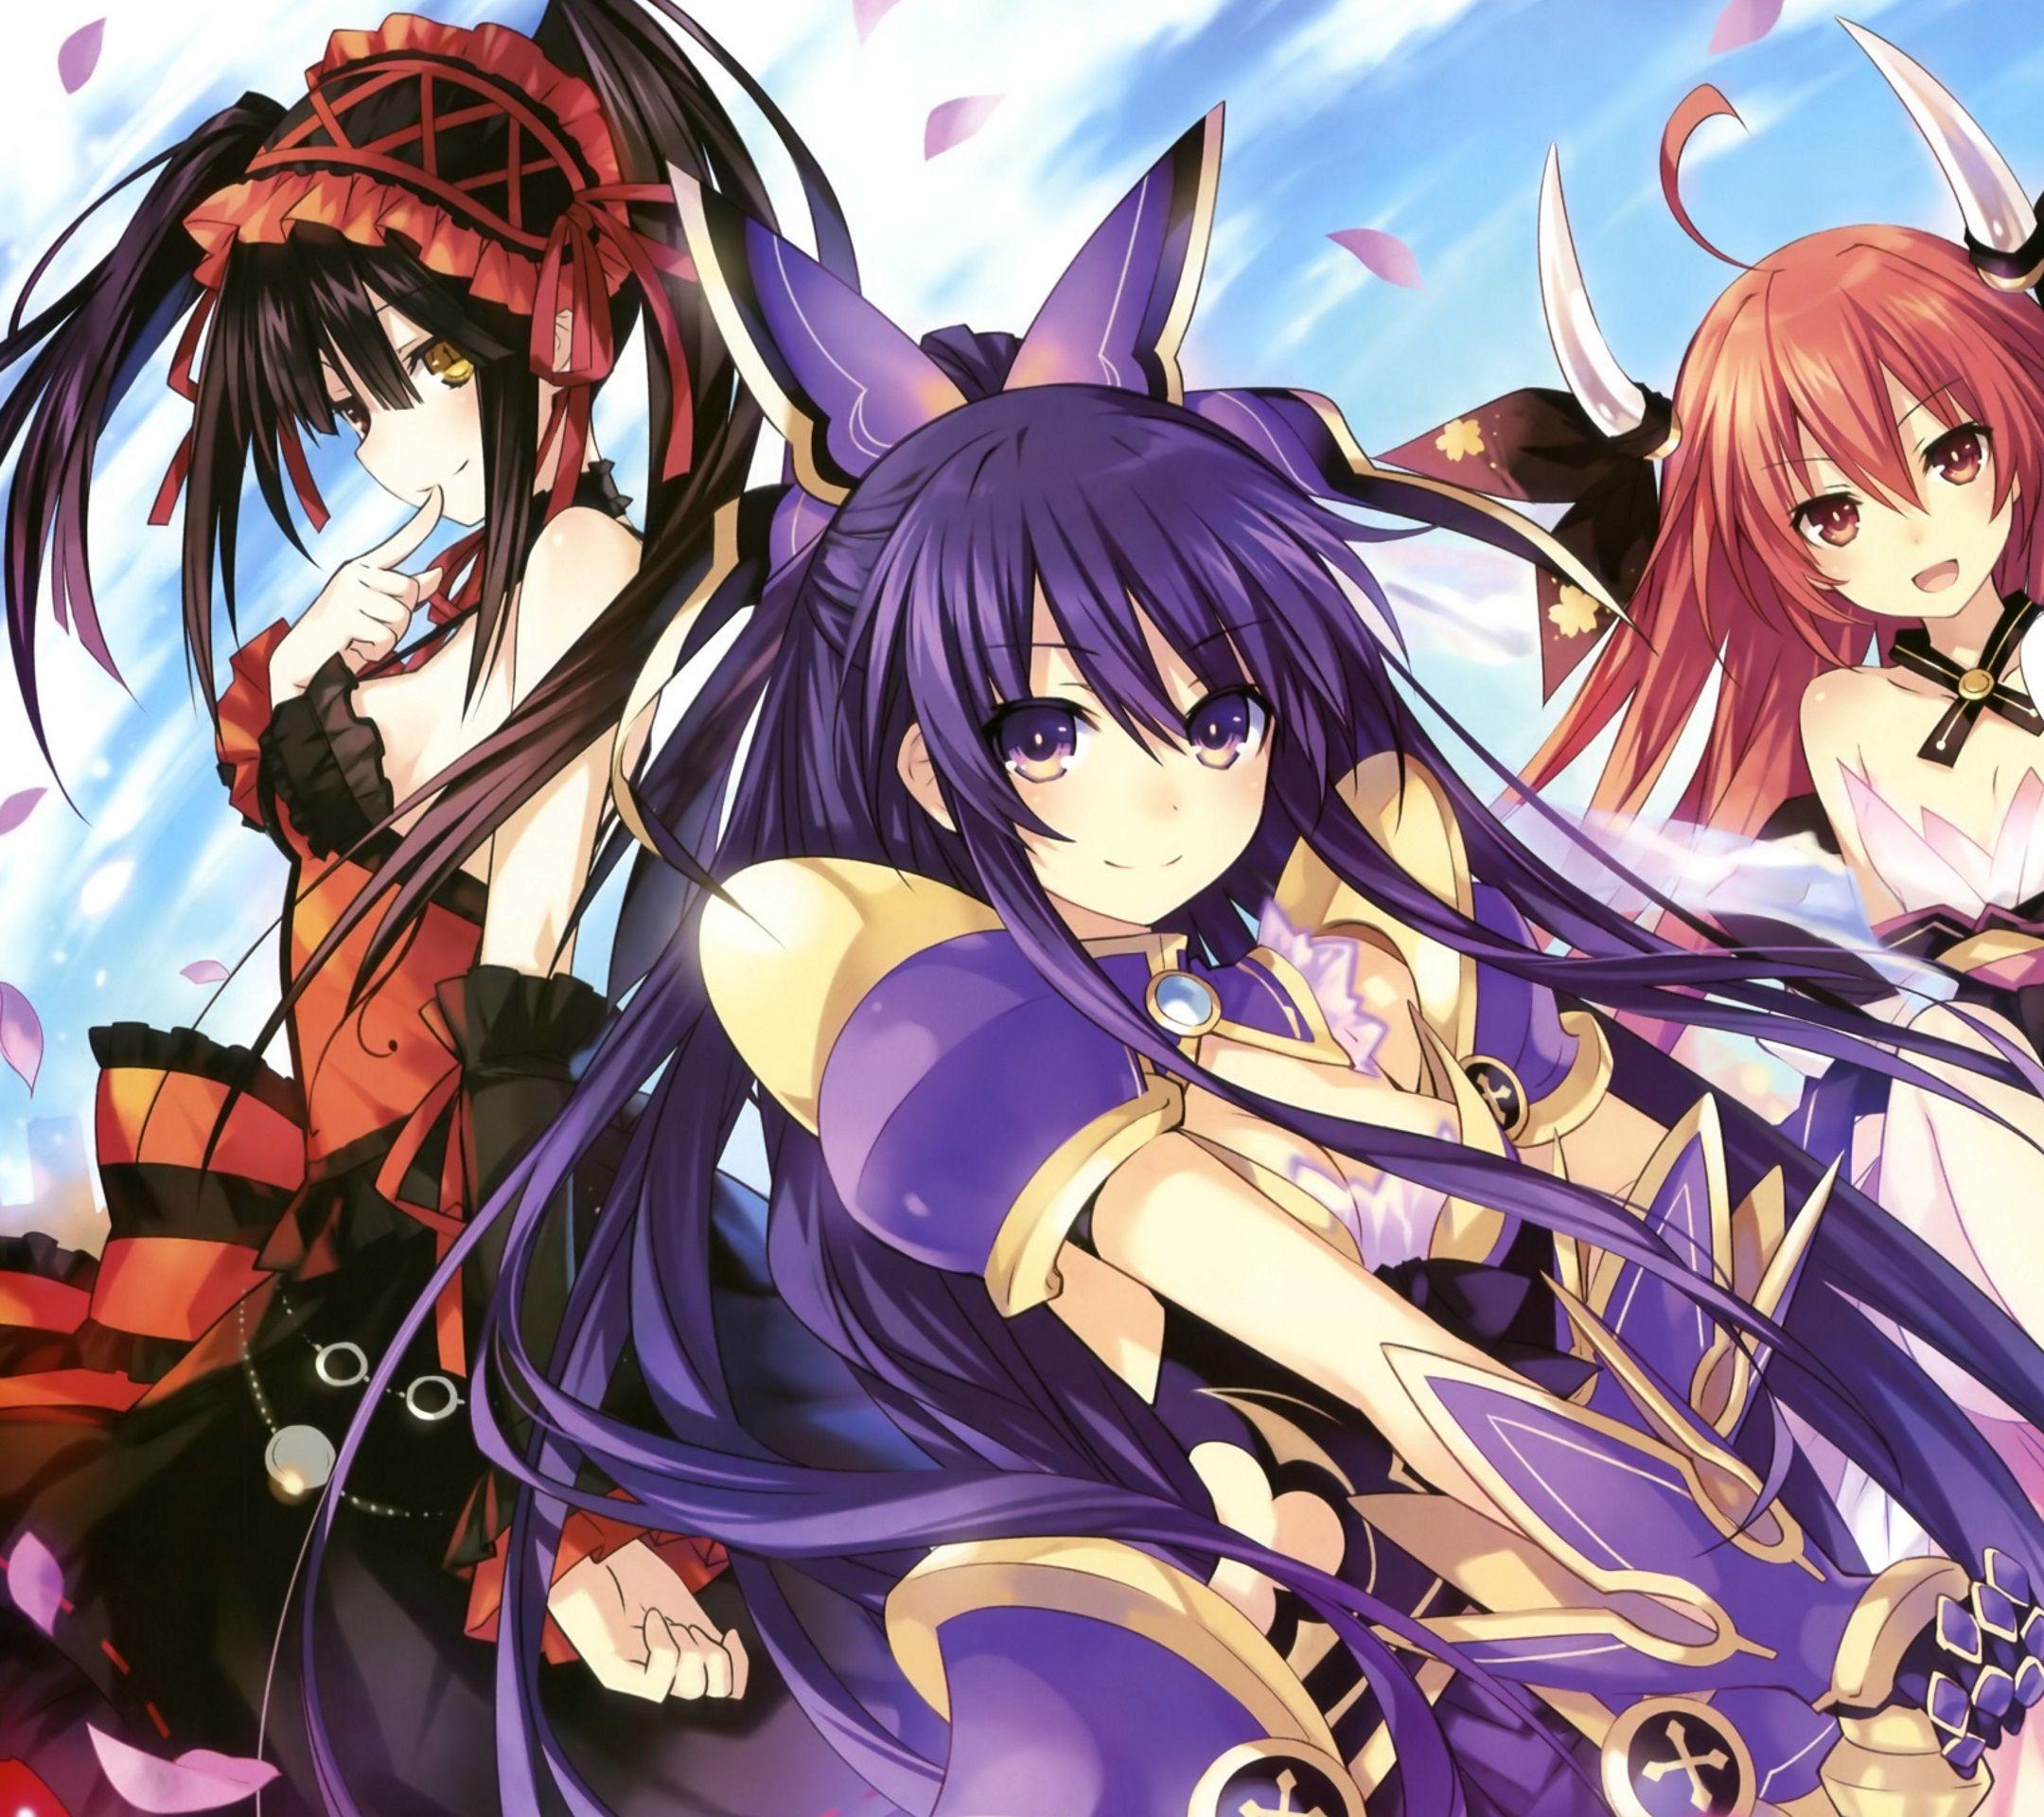 Date a Live II wallpaper 2160x 1080x1920 for android and iPhone